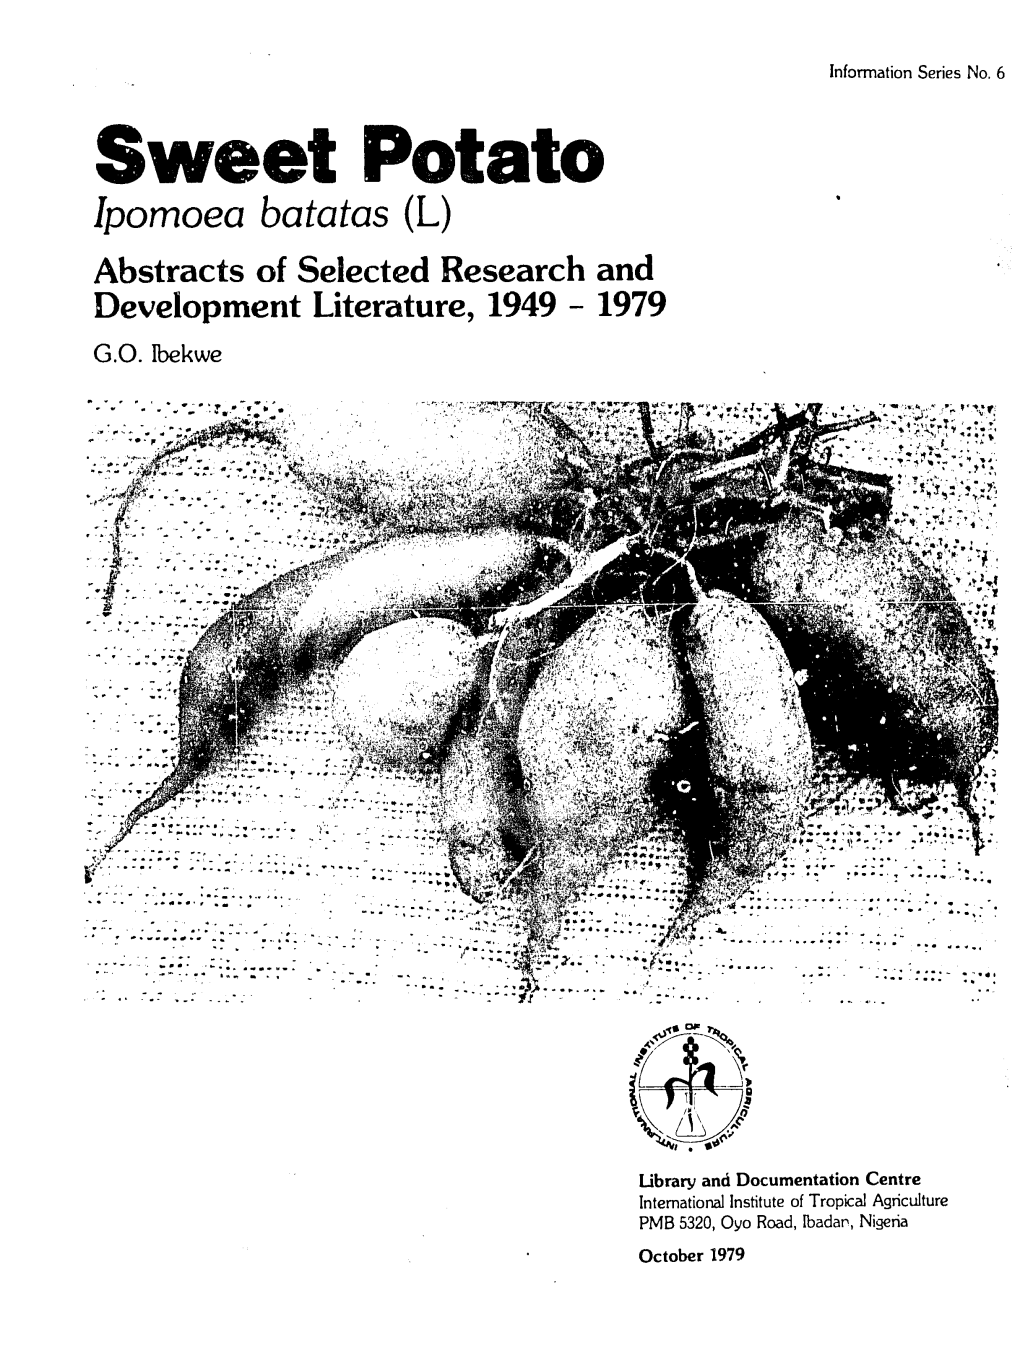 Sweet Potato Ipomoea Batatas (L) Abstracts of Selected Research and Development Literature, 1949 - 1979 G.O